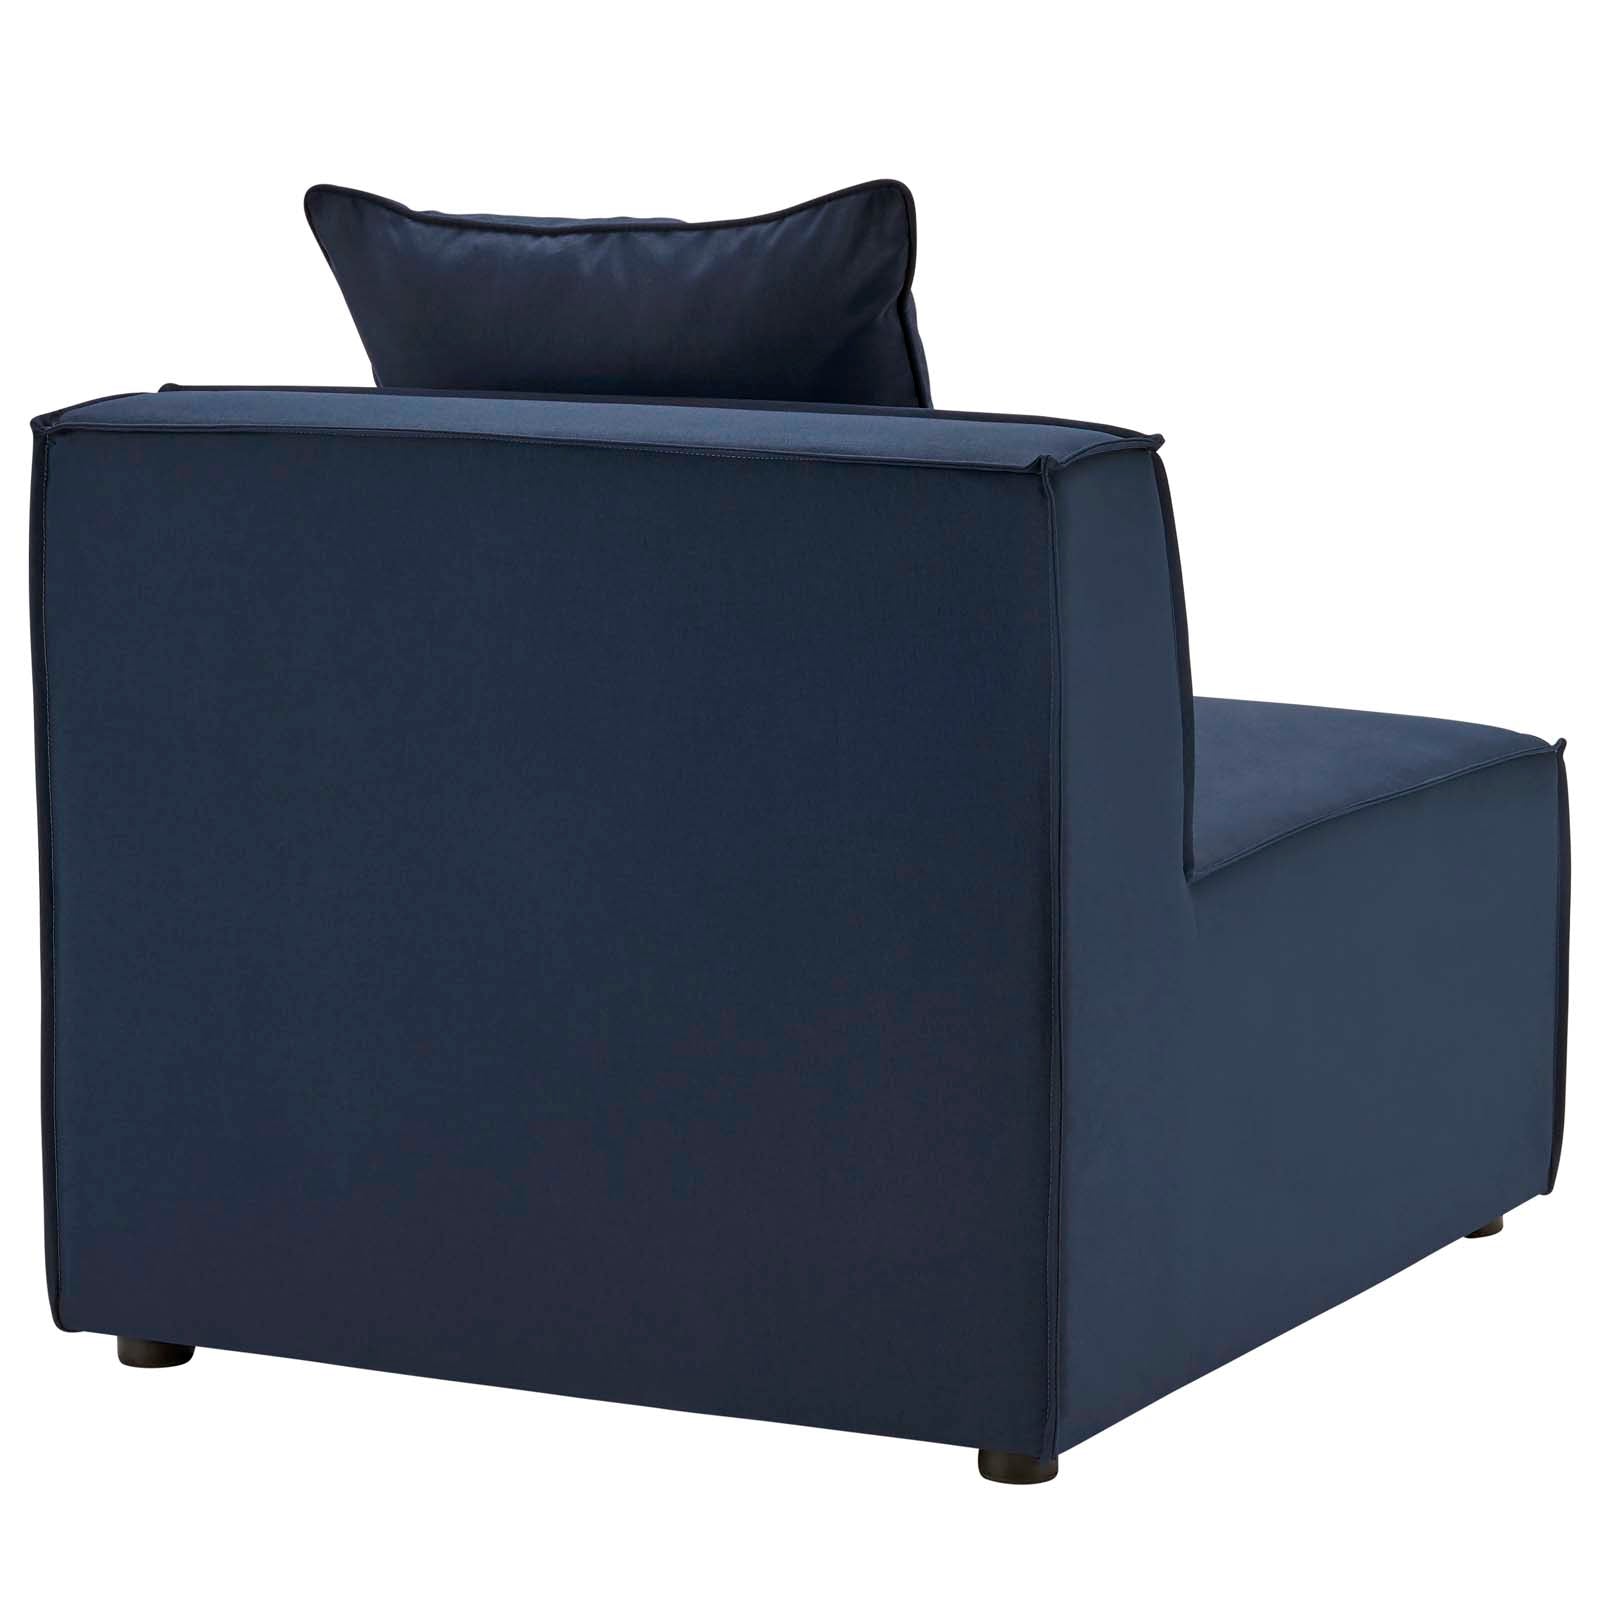 Modway Outdoor Sofas - Saybrook 103.5" Outdoor Patio Upholstered 4-Piece Sectional Sofa Navy